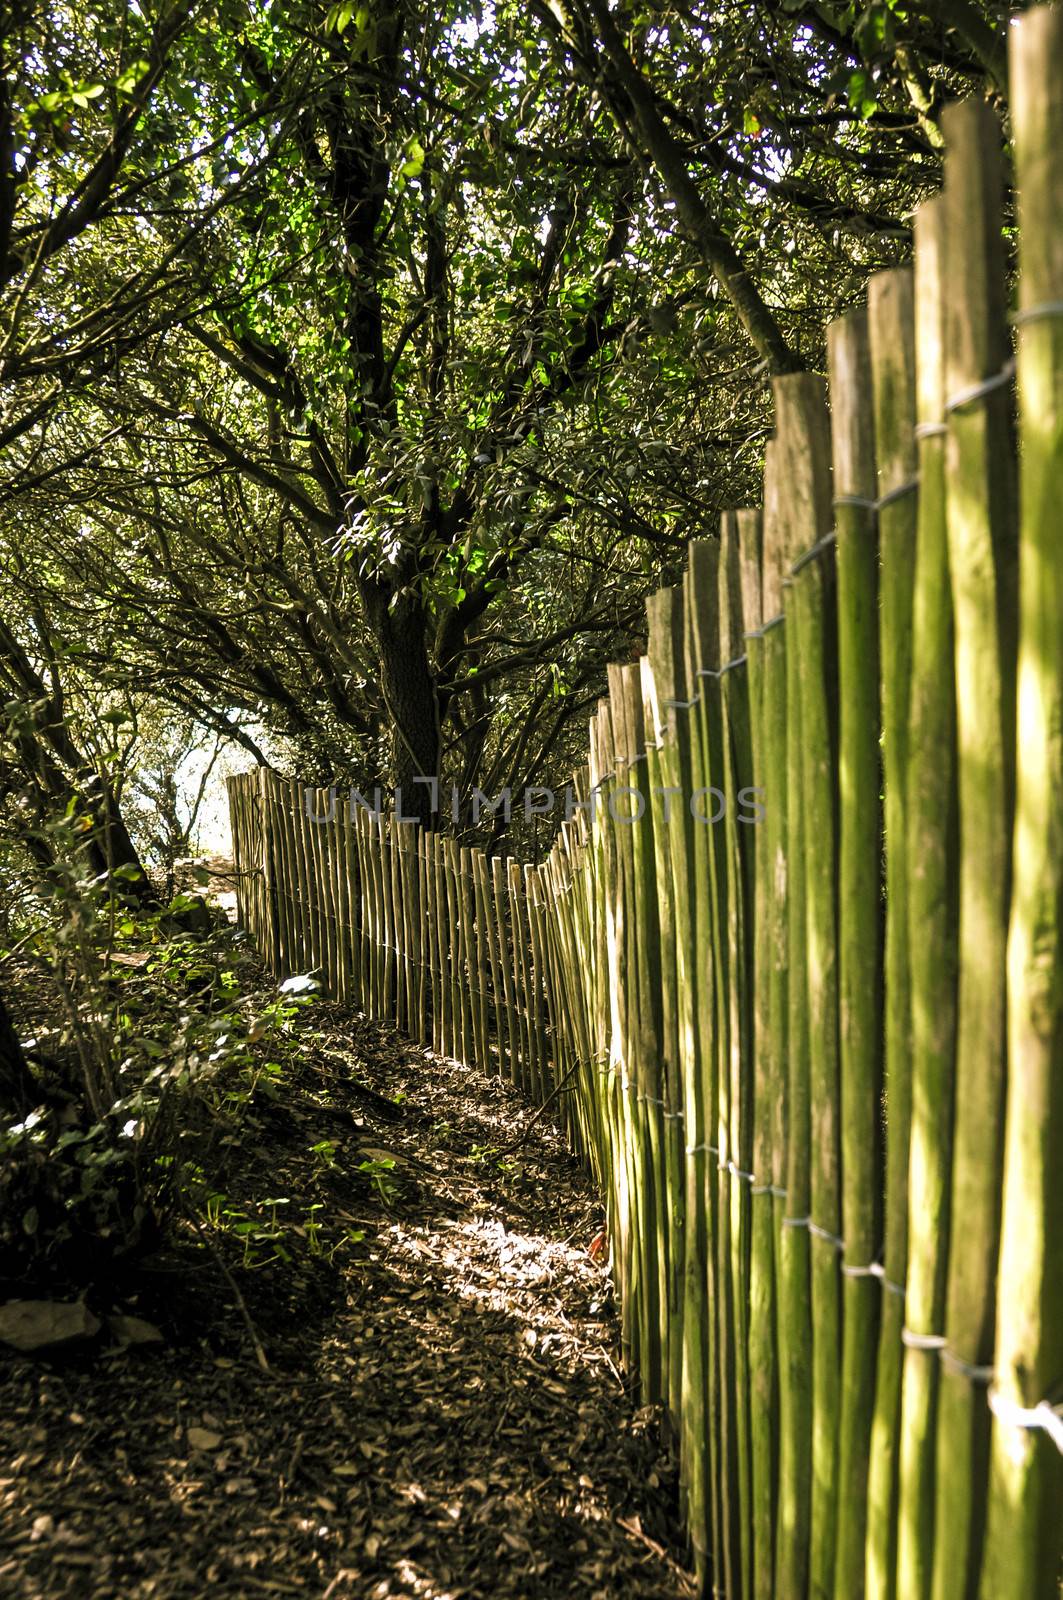 Wooden fence in a forest